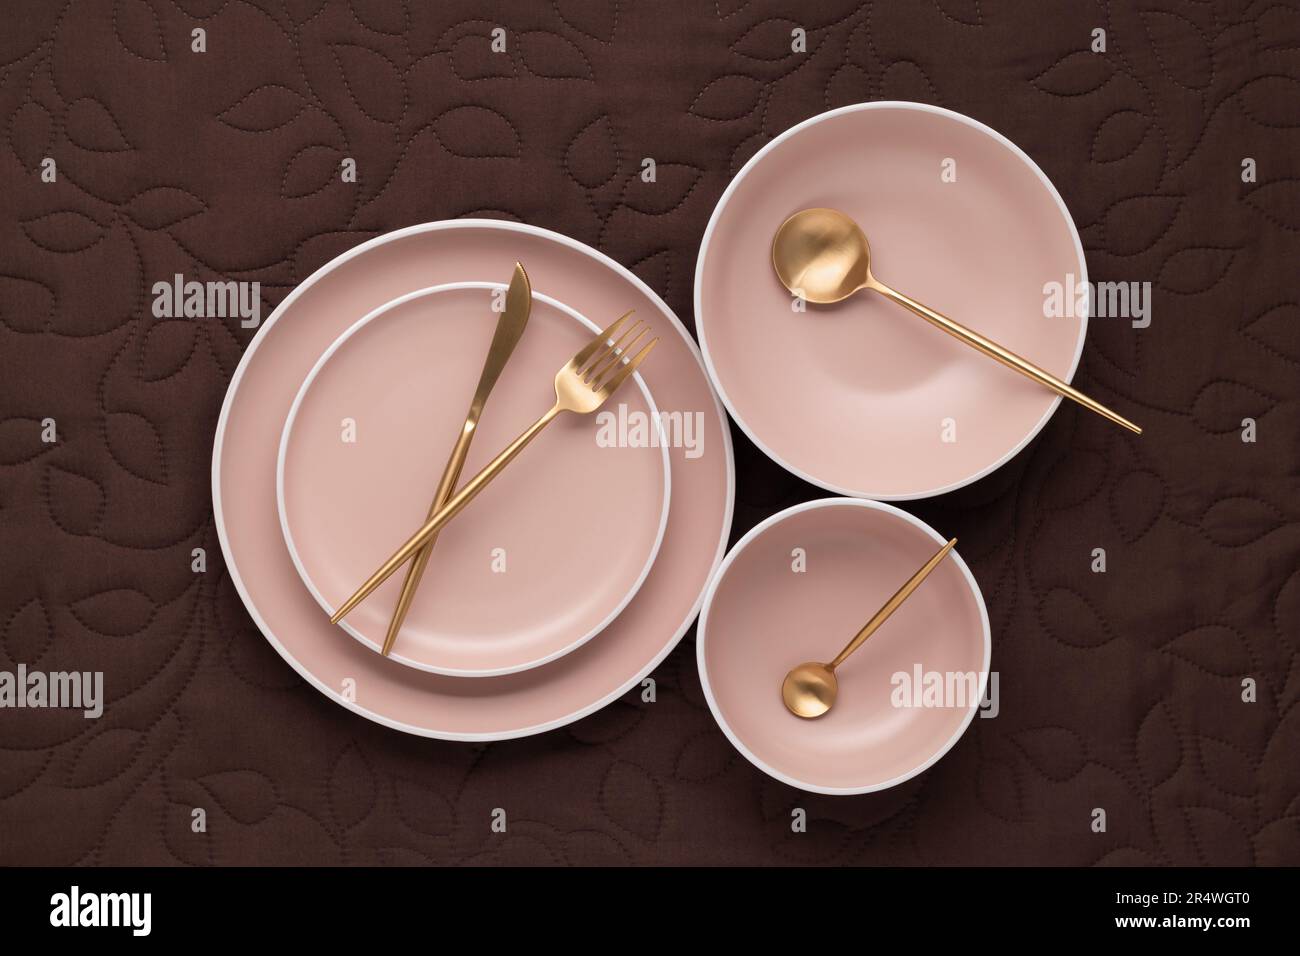 A set of round beige plates of different sizes on the table, top view. Golden cutlery and serving utensils. An empty dishes on a dark brown fabric tab Stock Photo